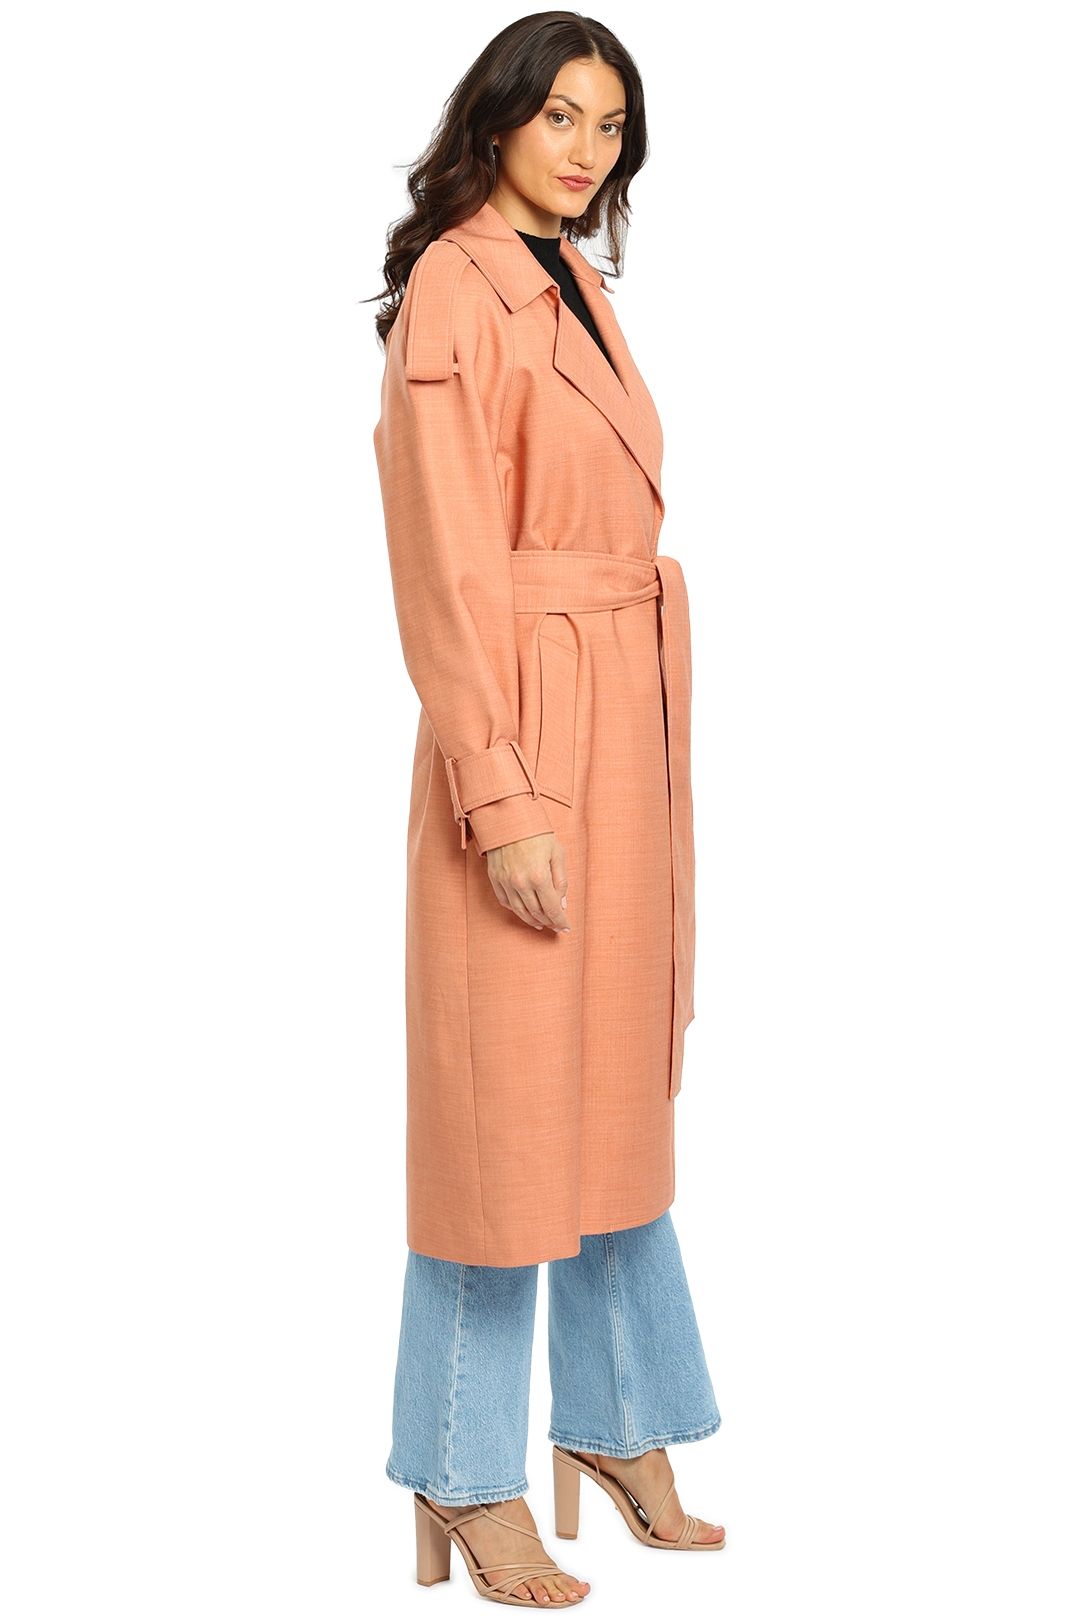 Camilla and Marc Marley Trench Coat belt